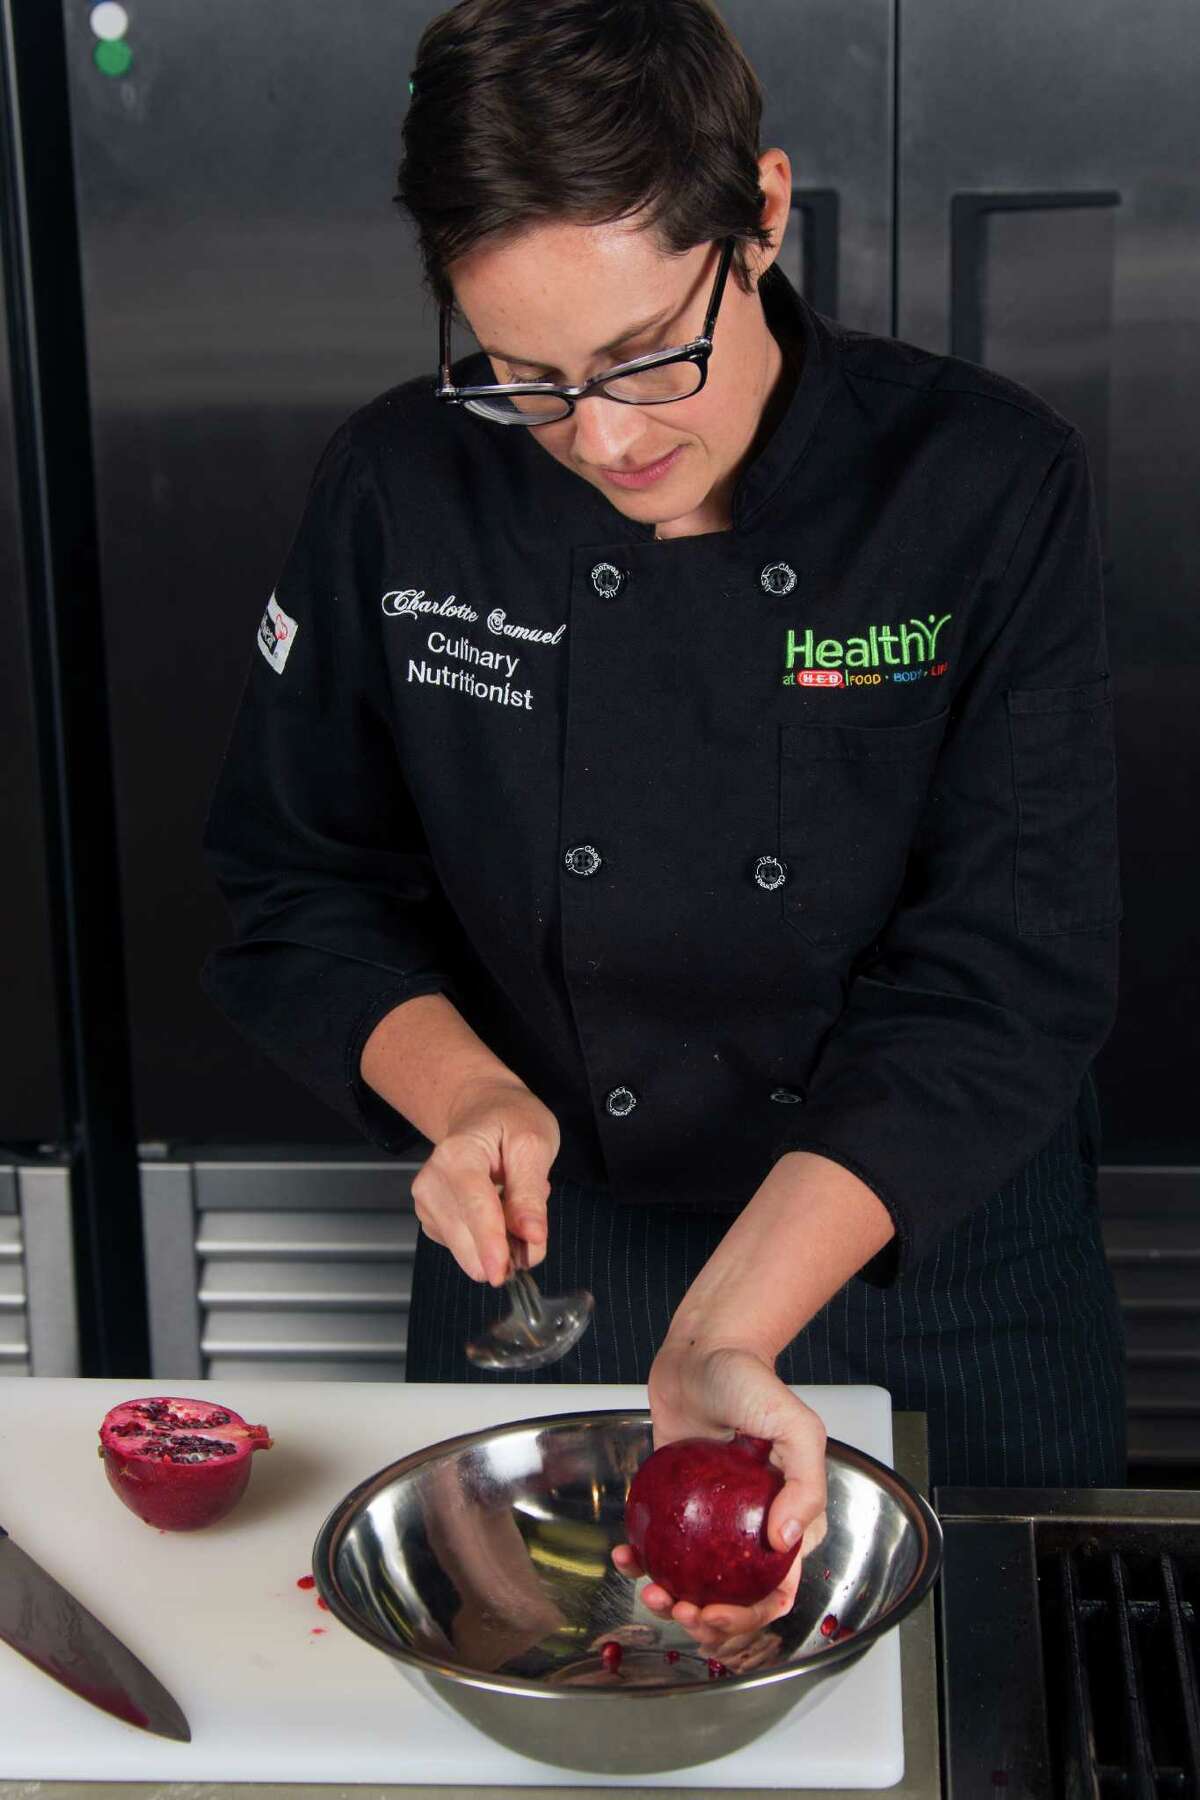 After cutting the fruit in half, HEB Chef Charlotte Samuel removes the seeds from a pomegranate Tuesday July 29, 2014 by banging on the outside of the fruit with a heavy spoon which makes the seeds fall out.